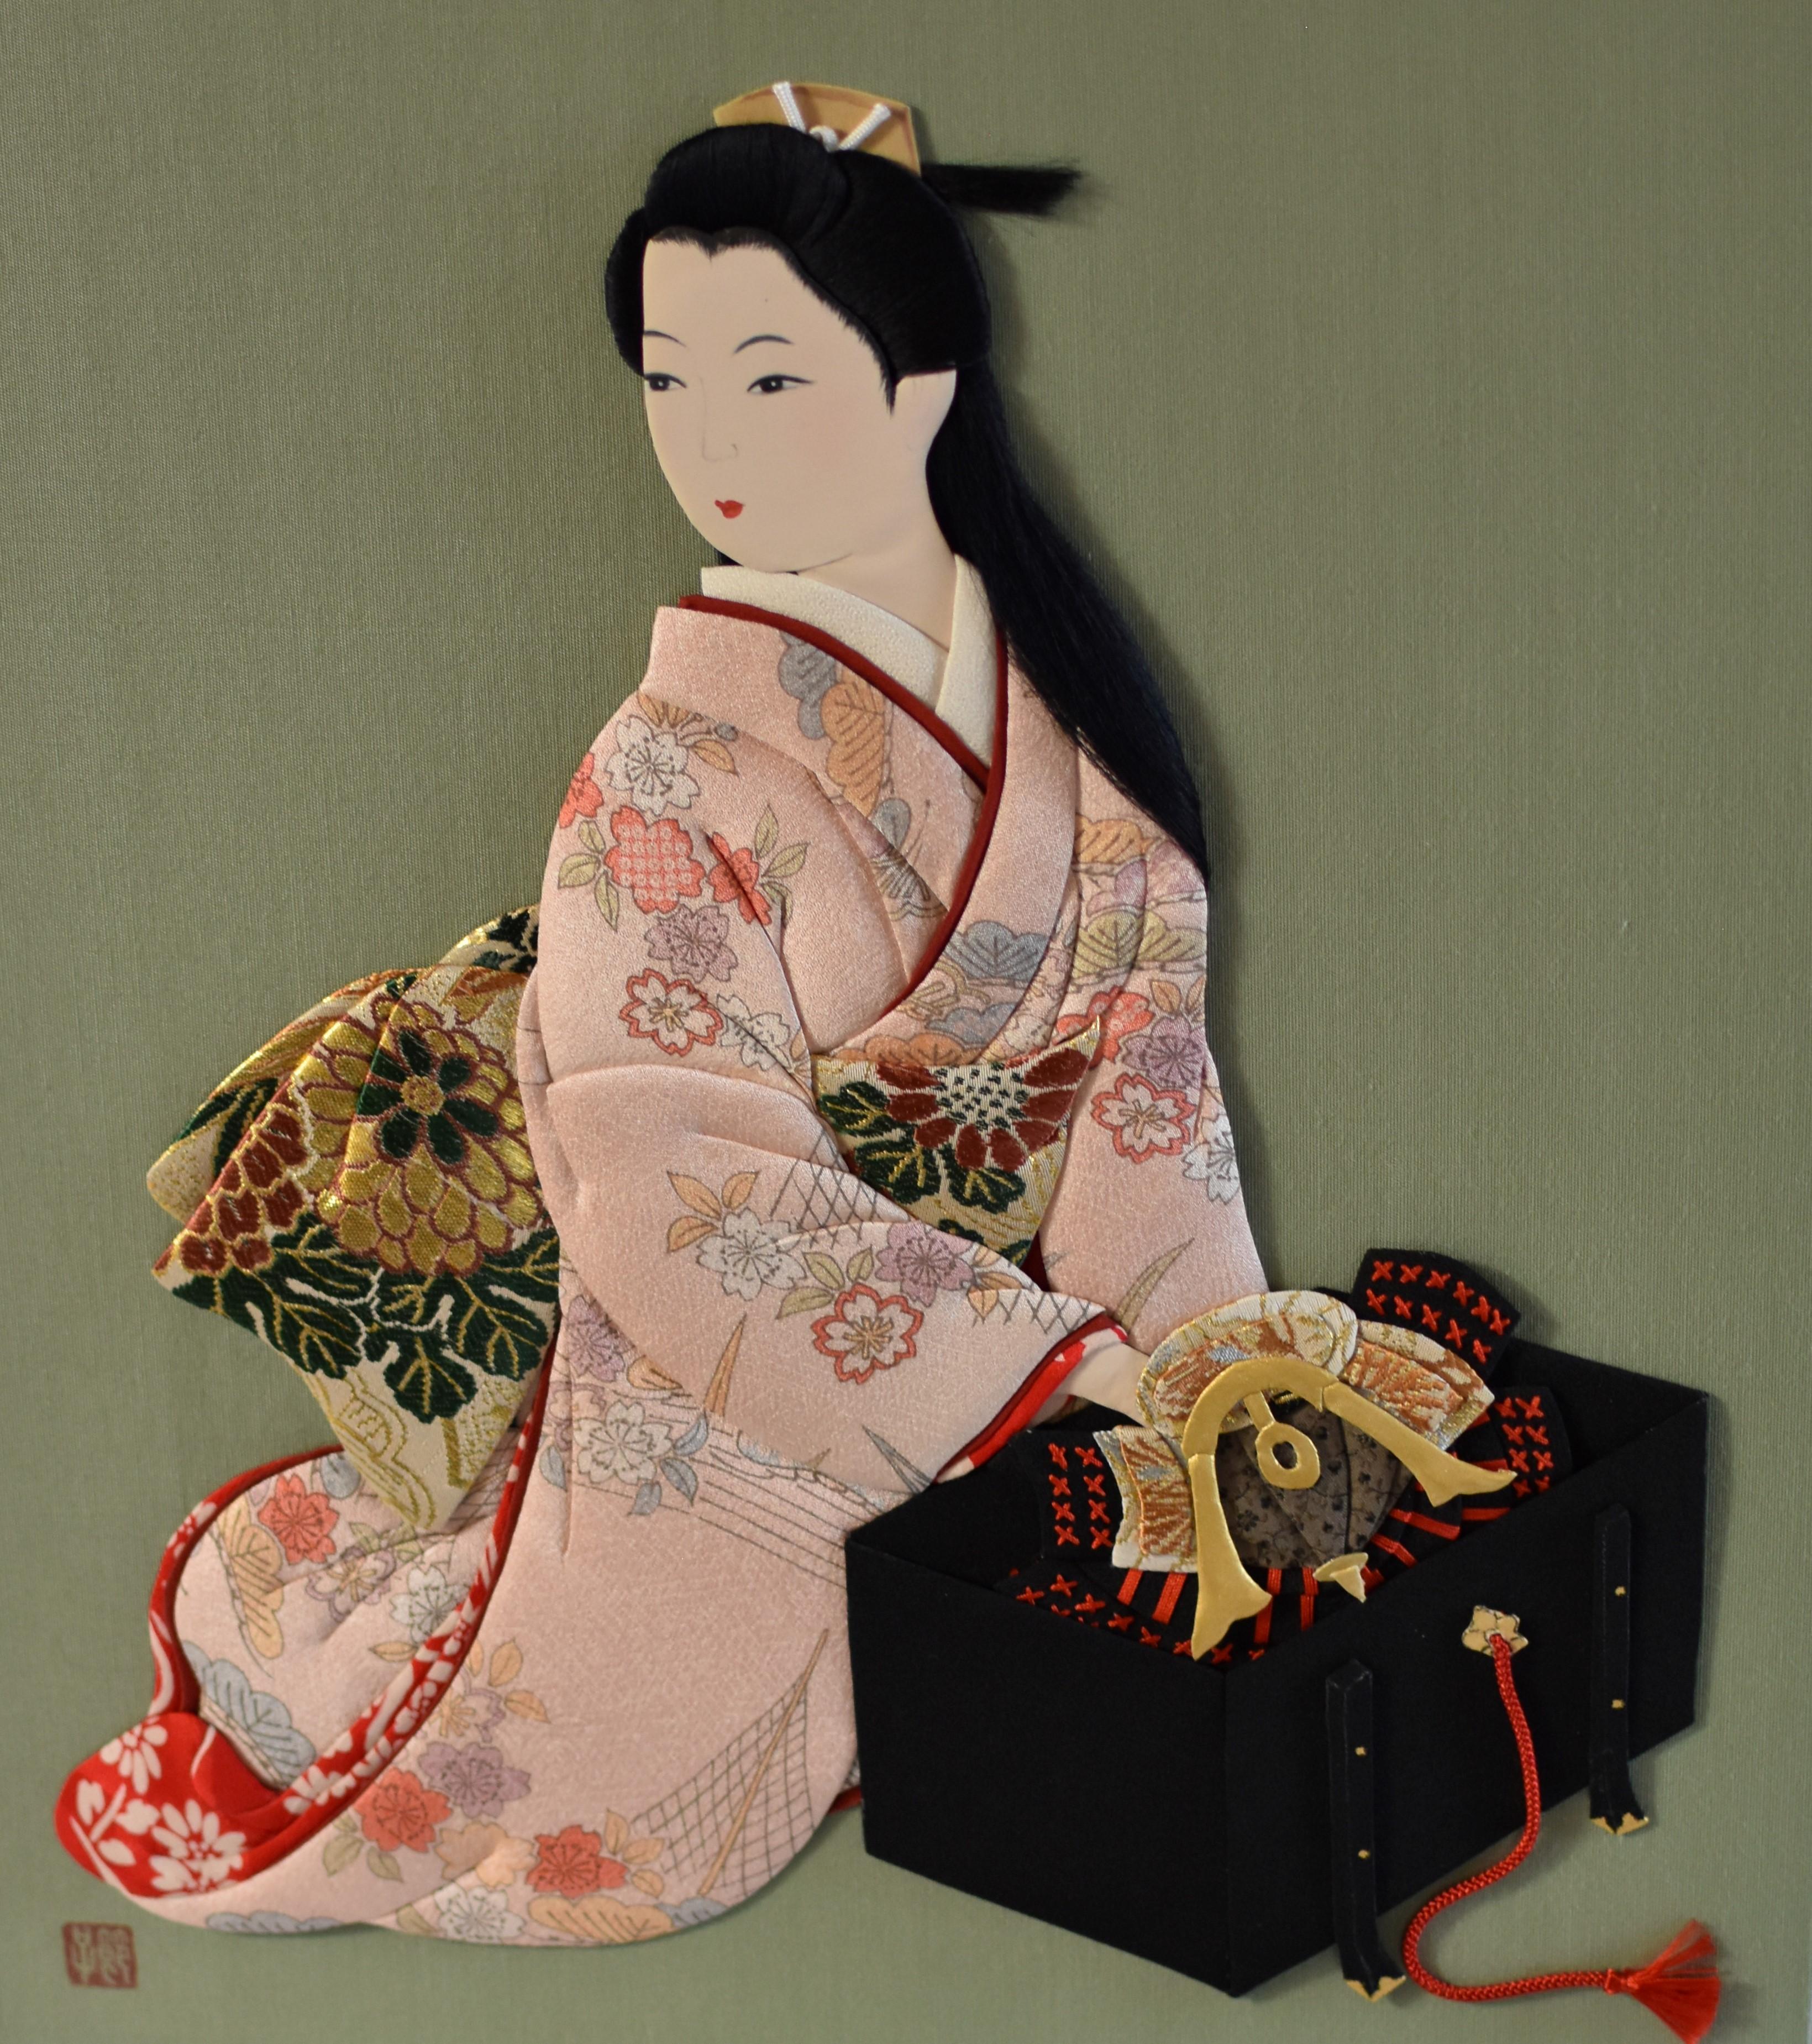 Exceptional Japanese contemporary framed collectible handcrafted oshie decorative wall art piece with a three-dimensional effect depicting a fascinating scene of a Japanese young lady wearing an exquisite Furisode kimono sitting to put back the